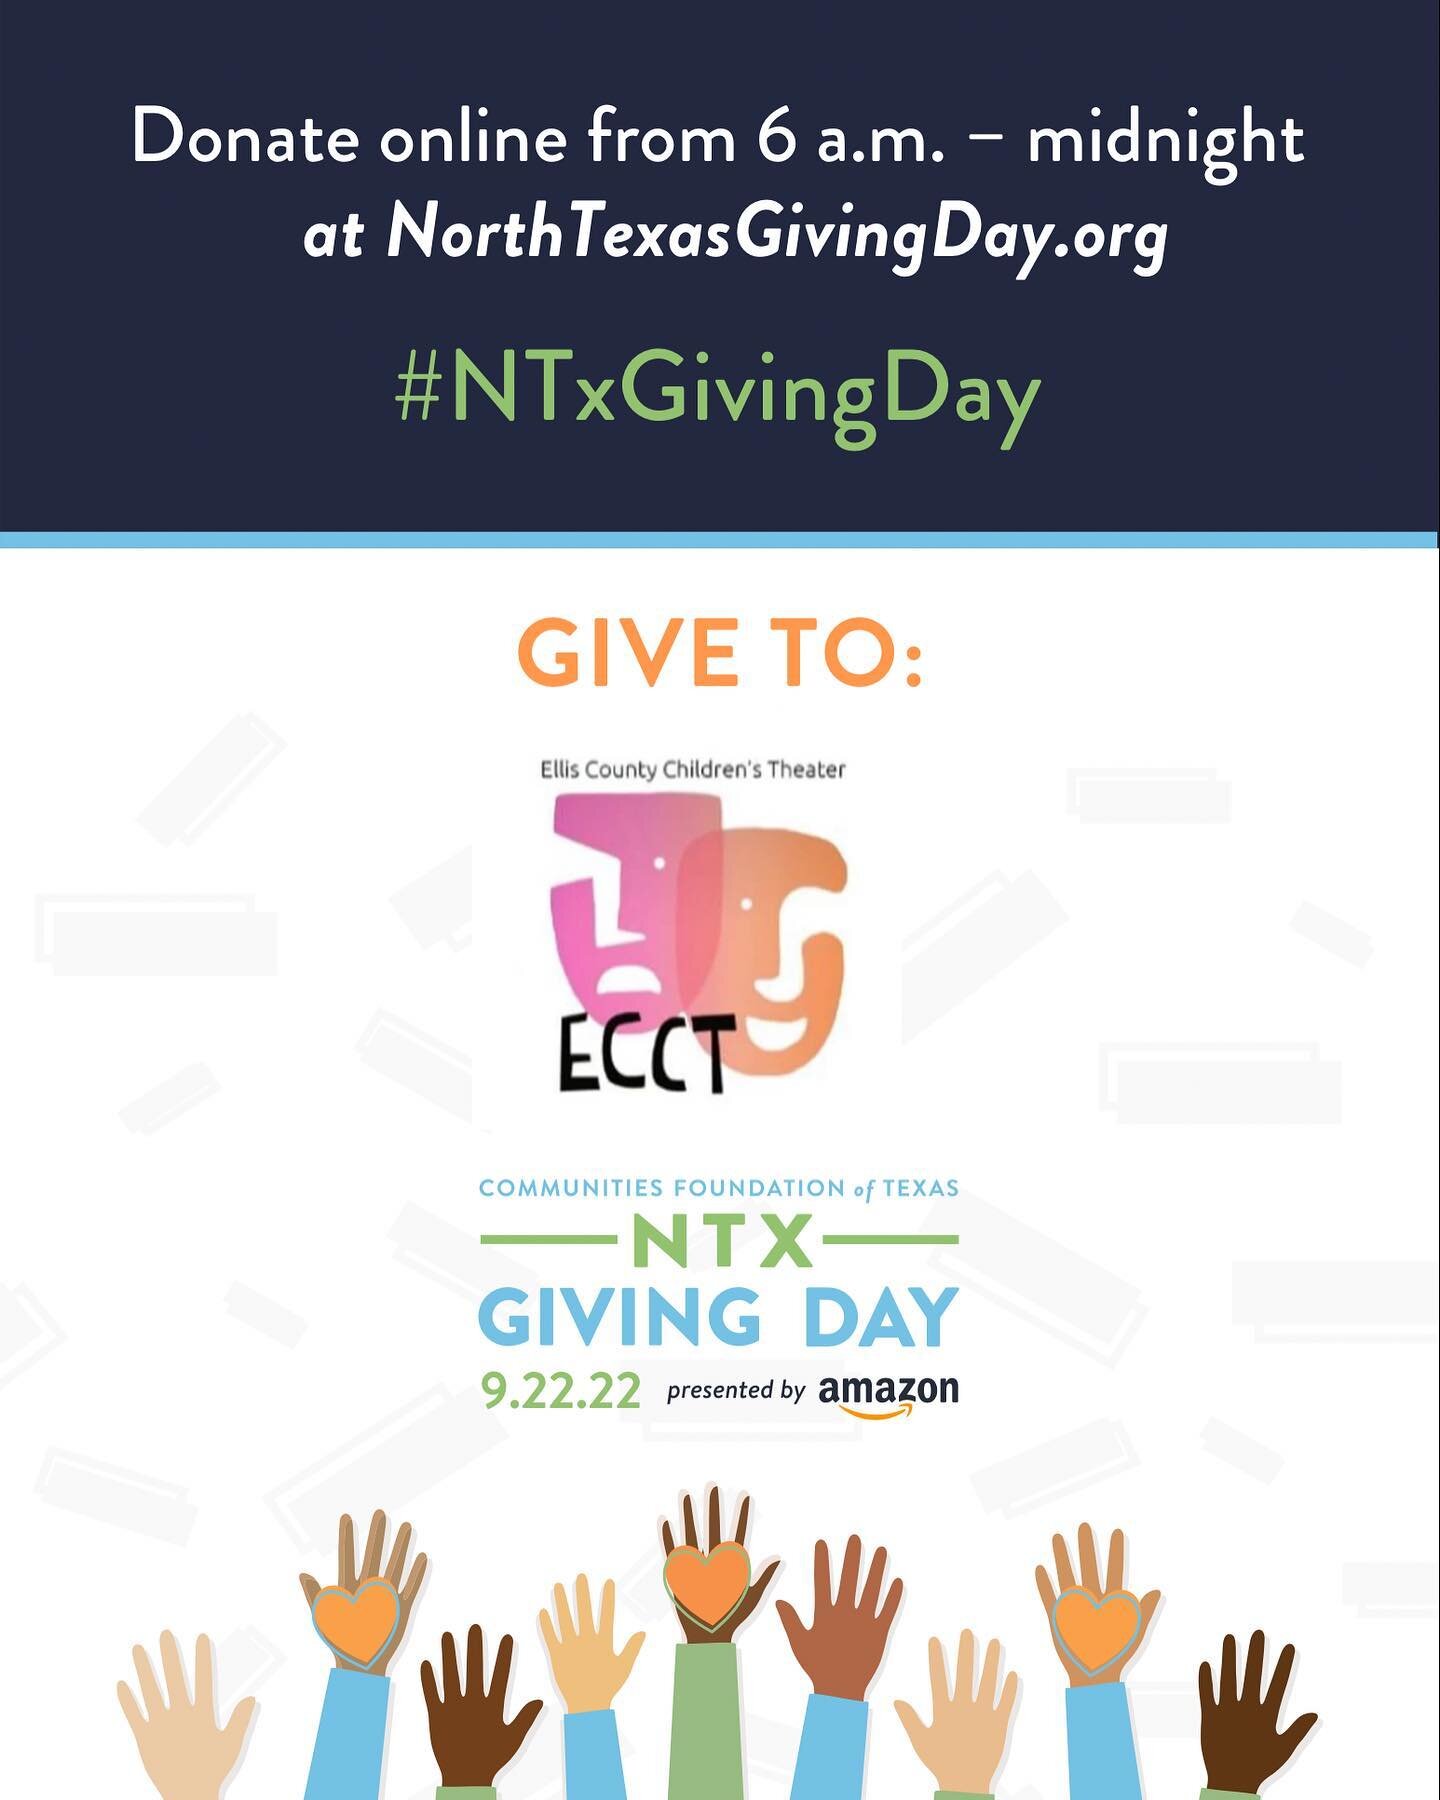 North Texas Giving Day is coming up- Mark your calendar!
Help us help your children in Theater Arts.
#ntxgivingday #performingarts #ecctshows